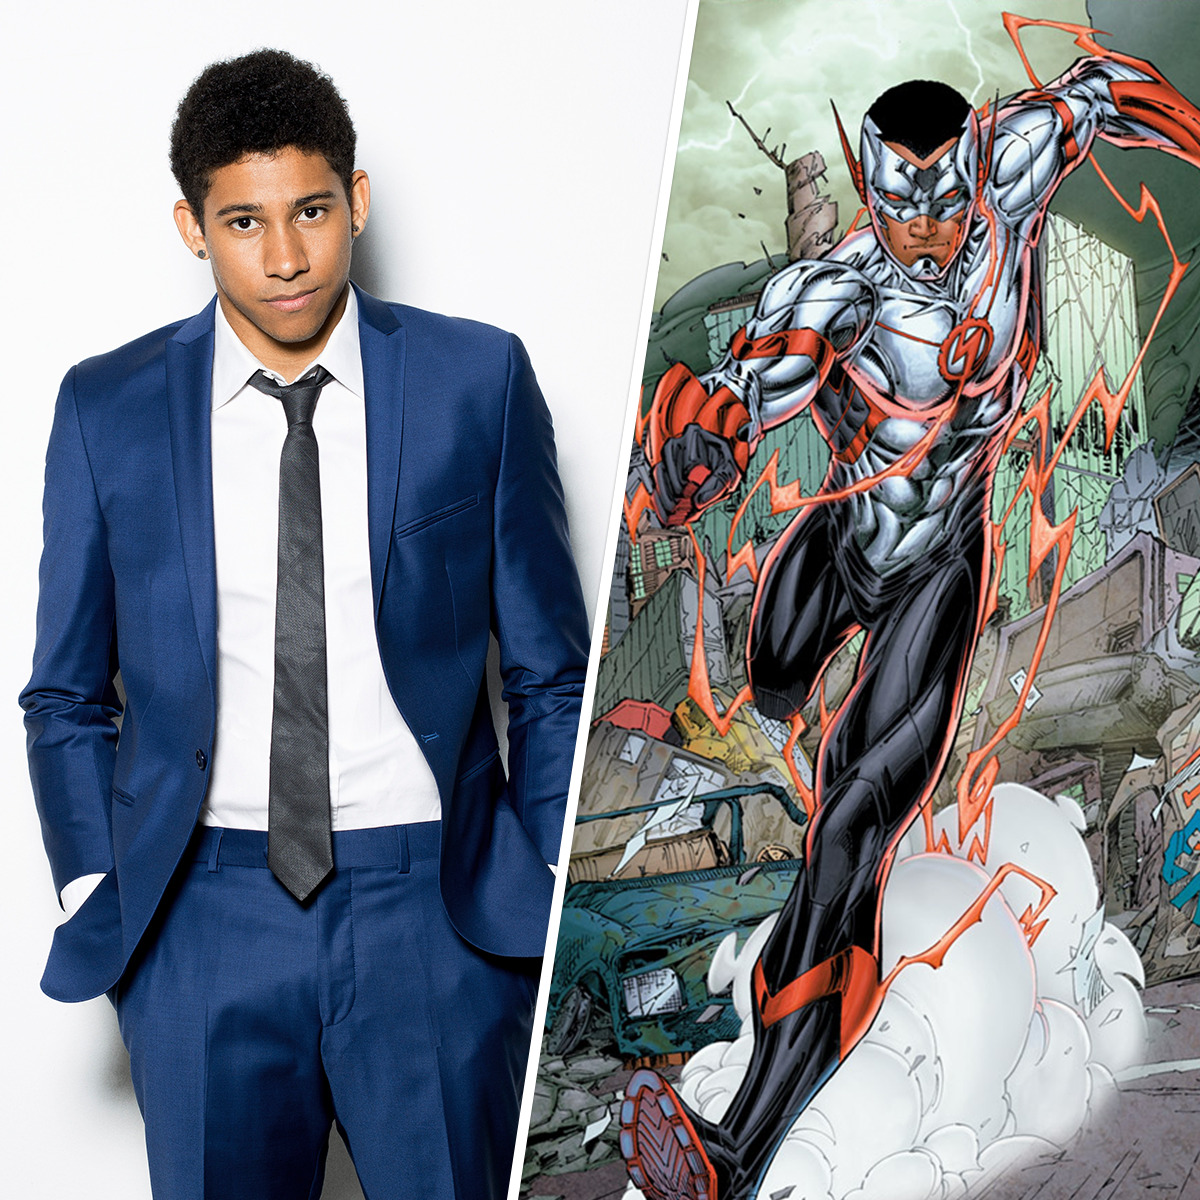 thecwflash:    KID FLASH CASTING NEWS! Keiynan Lonsdale has been cast as Wally West